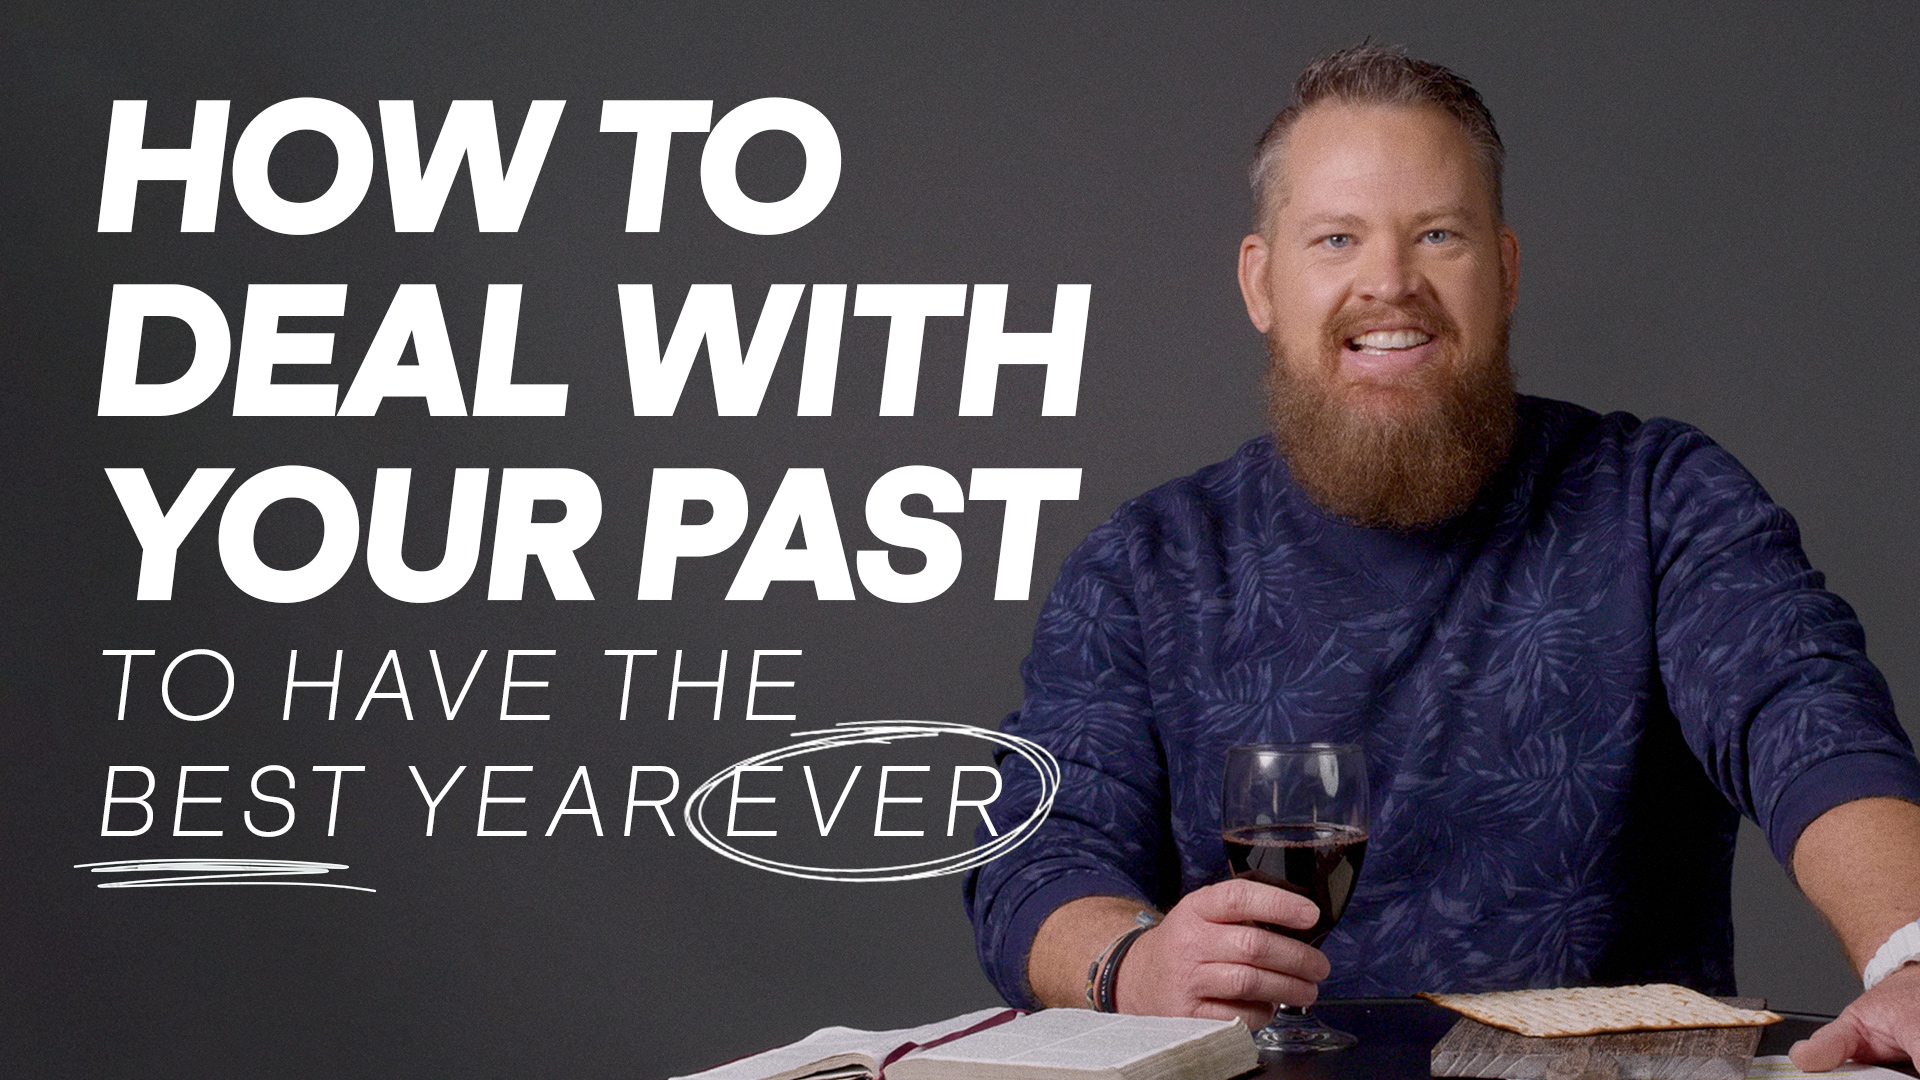 How To Deal With Your Past To Have The Best Year Ever